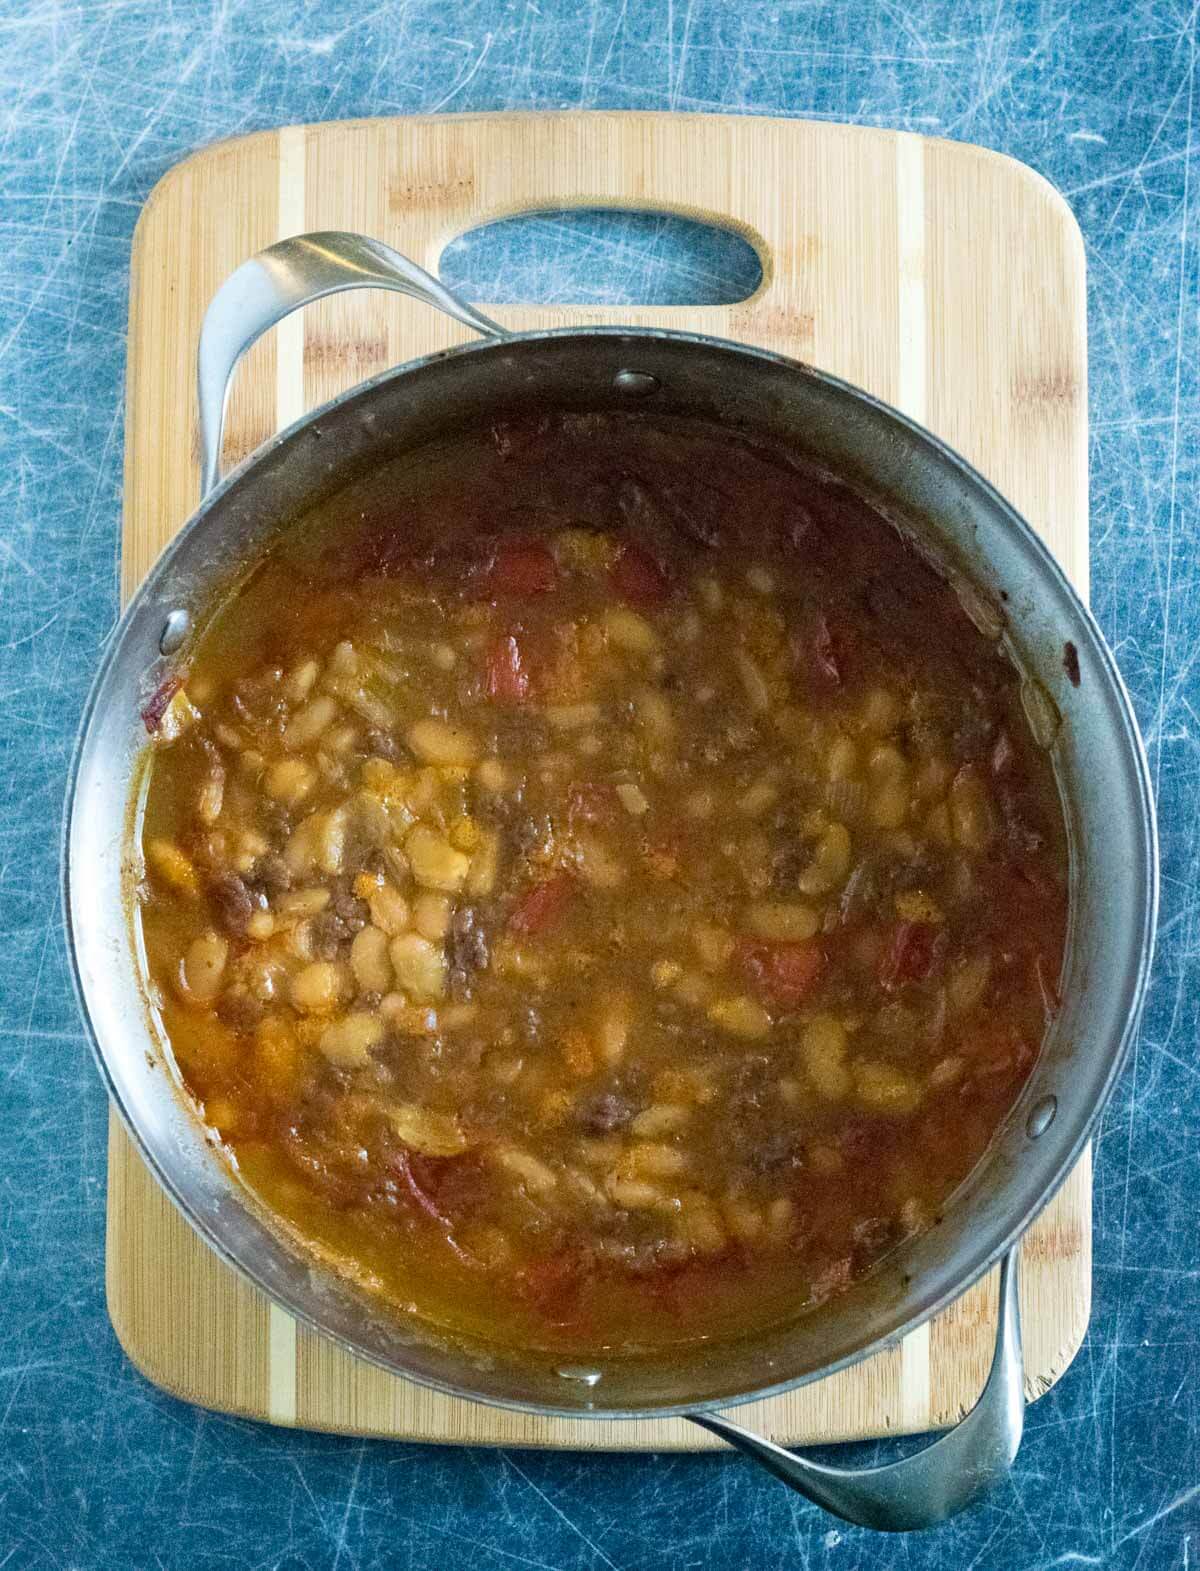 Pot of baked beans taken out of the oven.